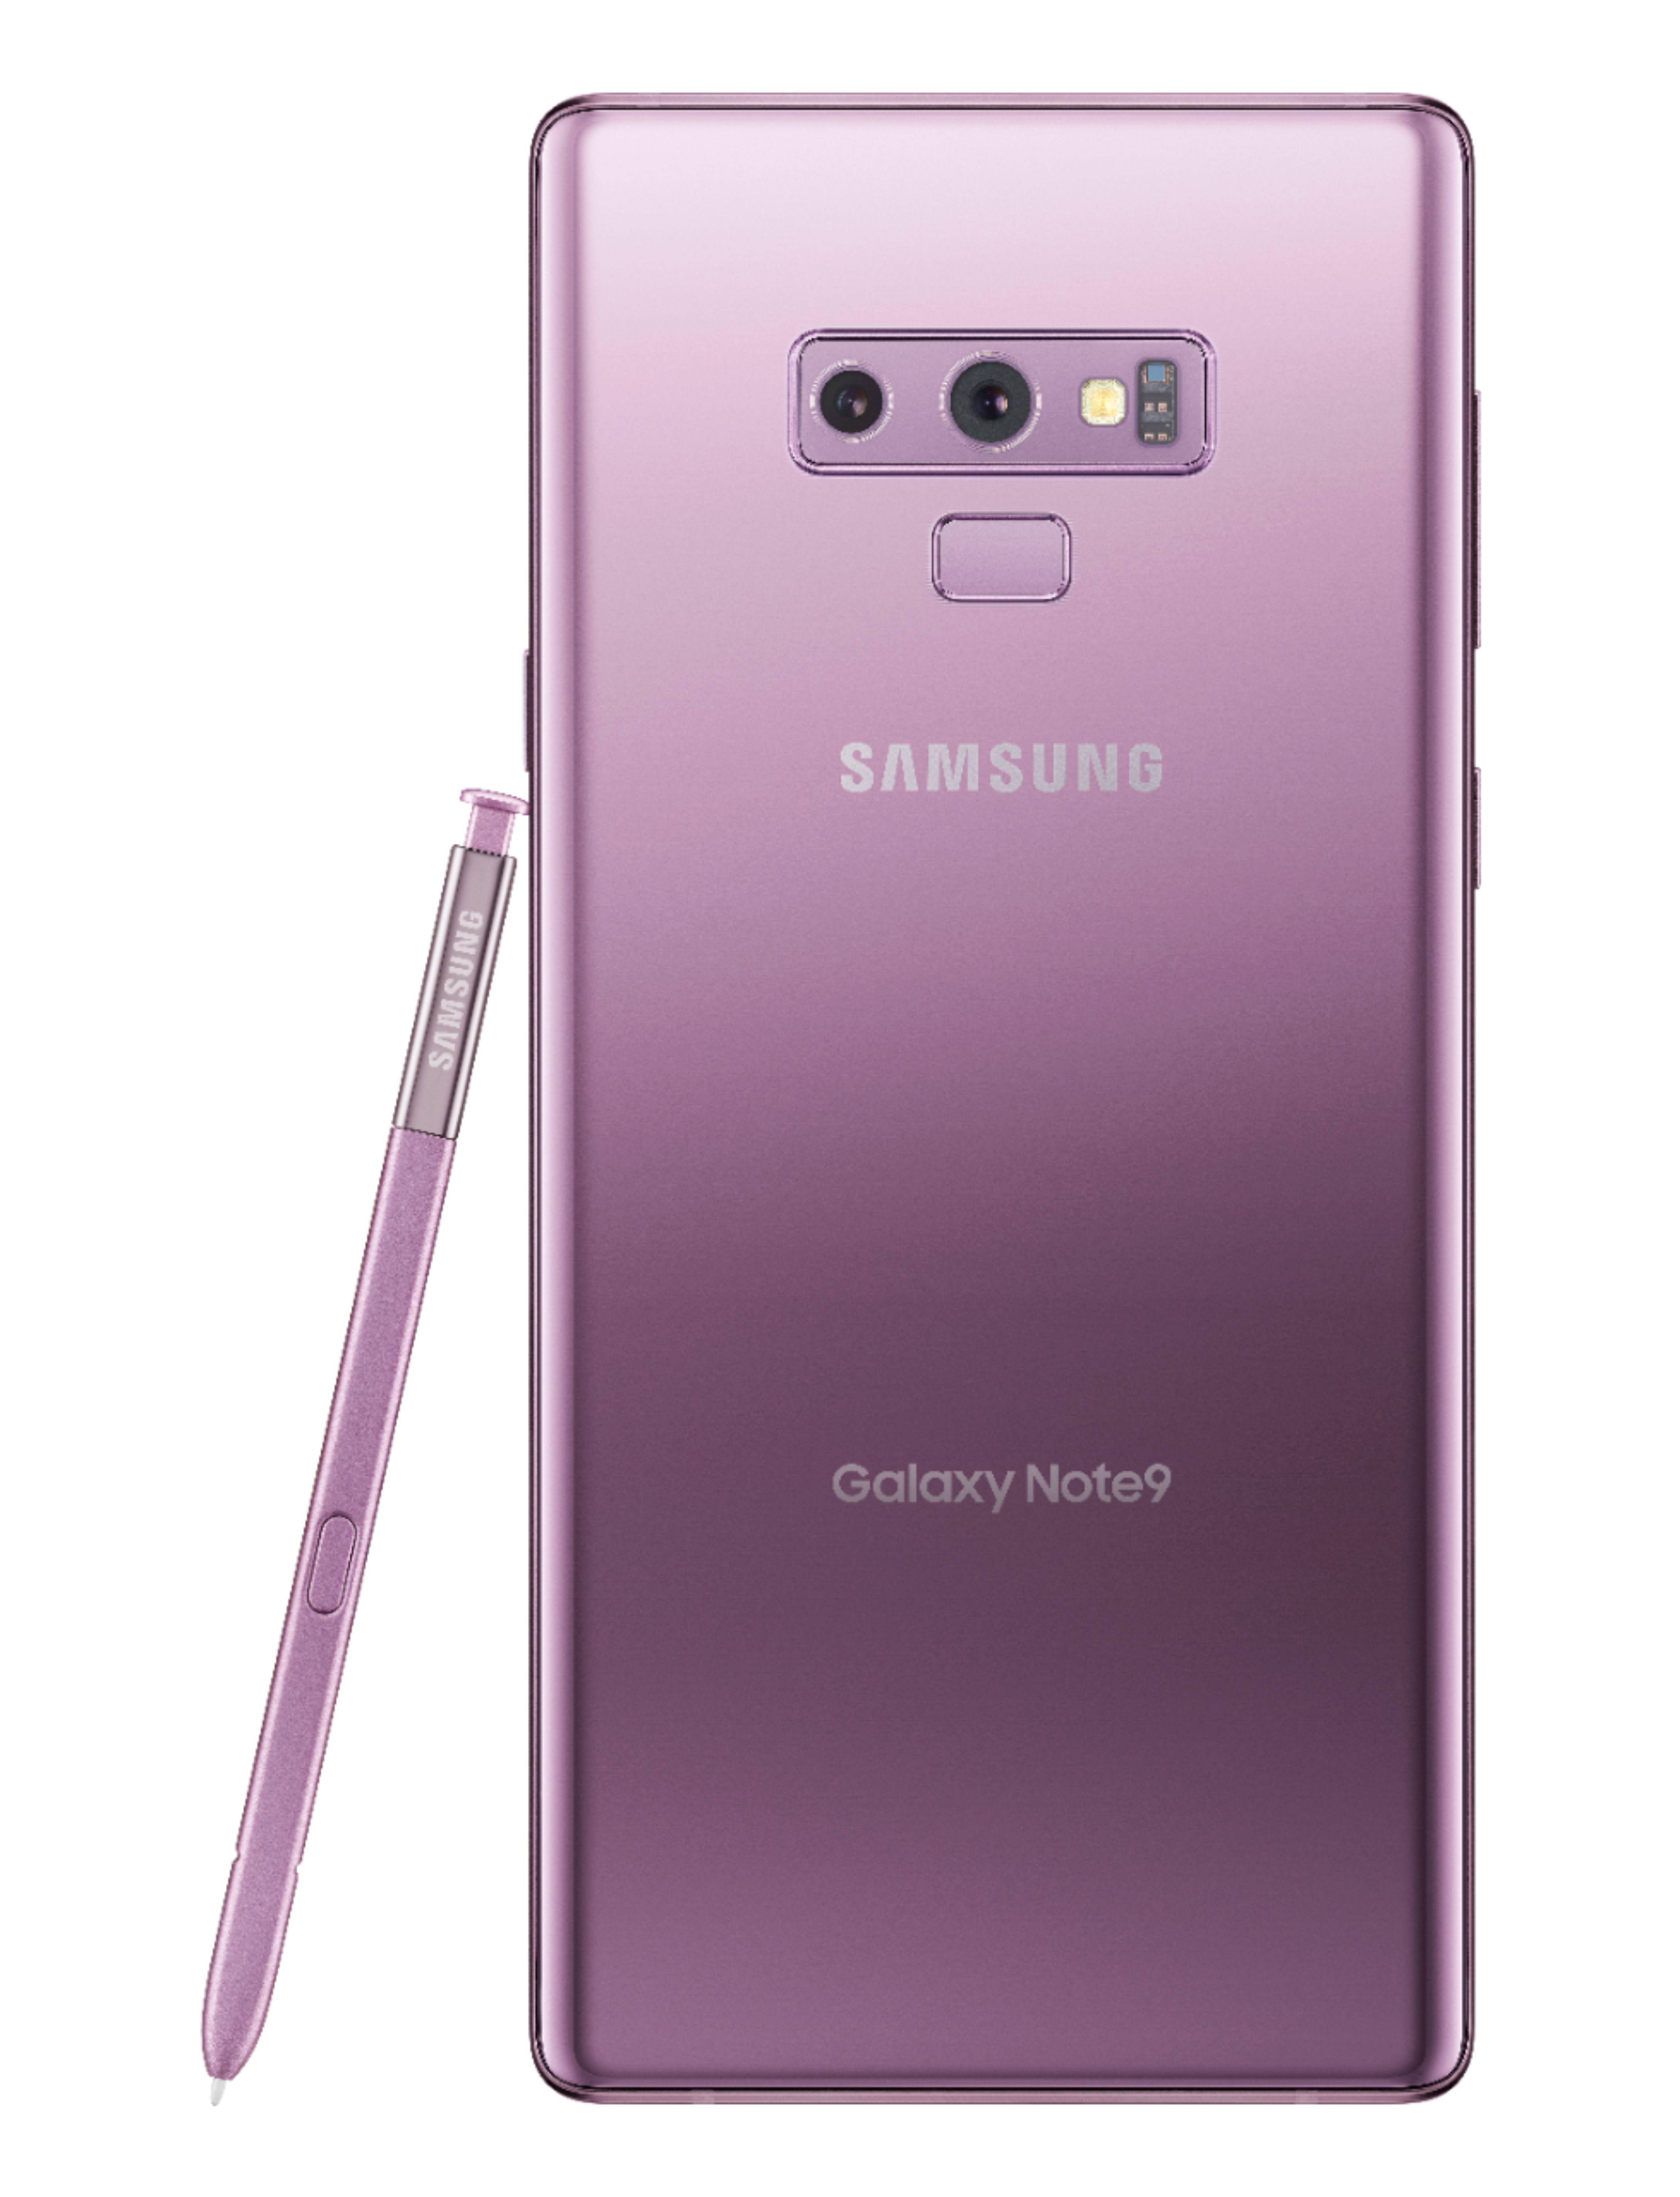 Back View: Samsung - Geek Squad Certified Refurbished Galaxy Note9 128GB - Lavender Purple (AT&T)